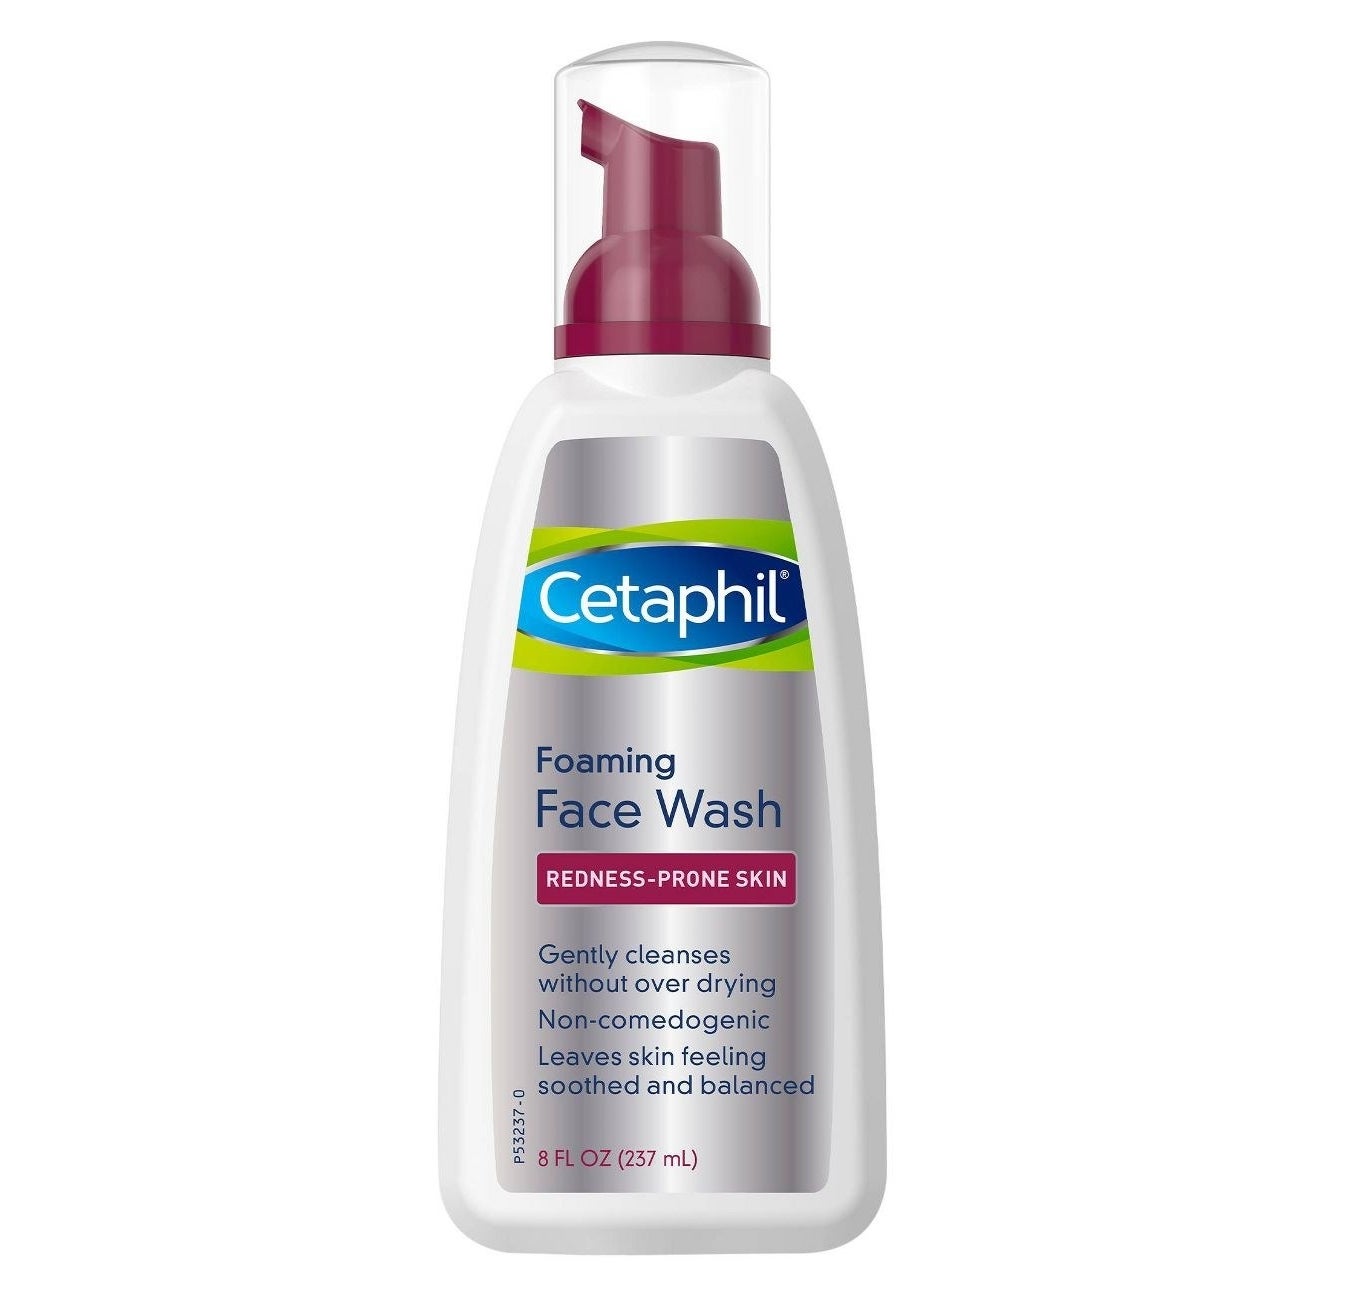 The Cetaphil redness prone foaming face wash